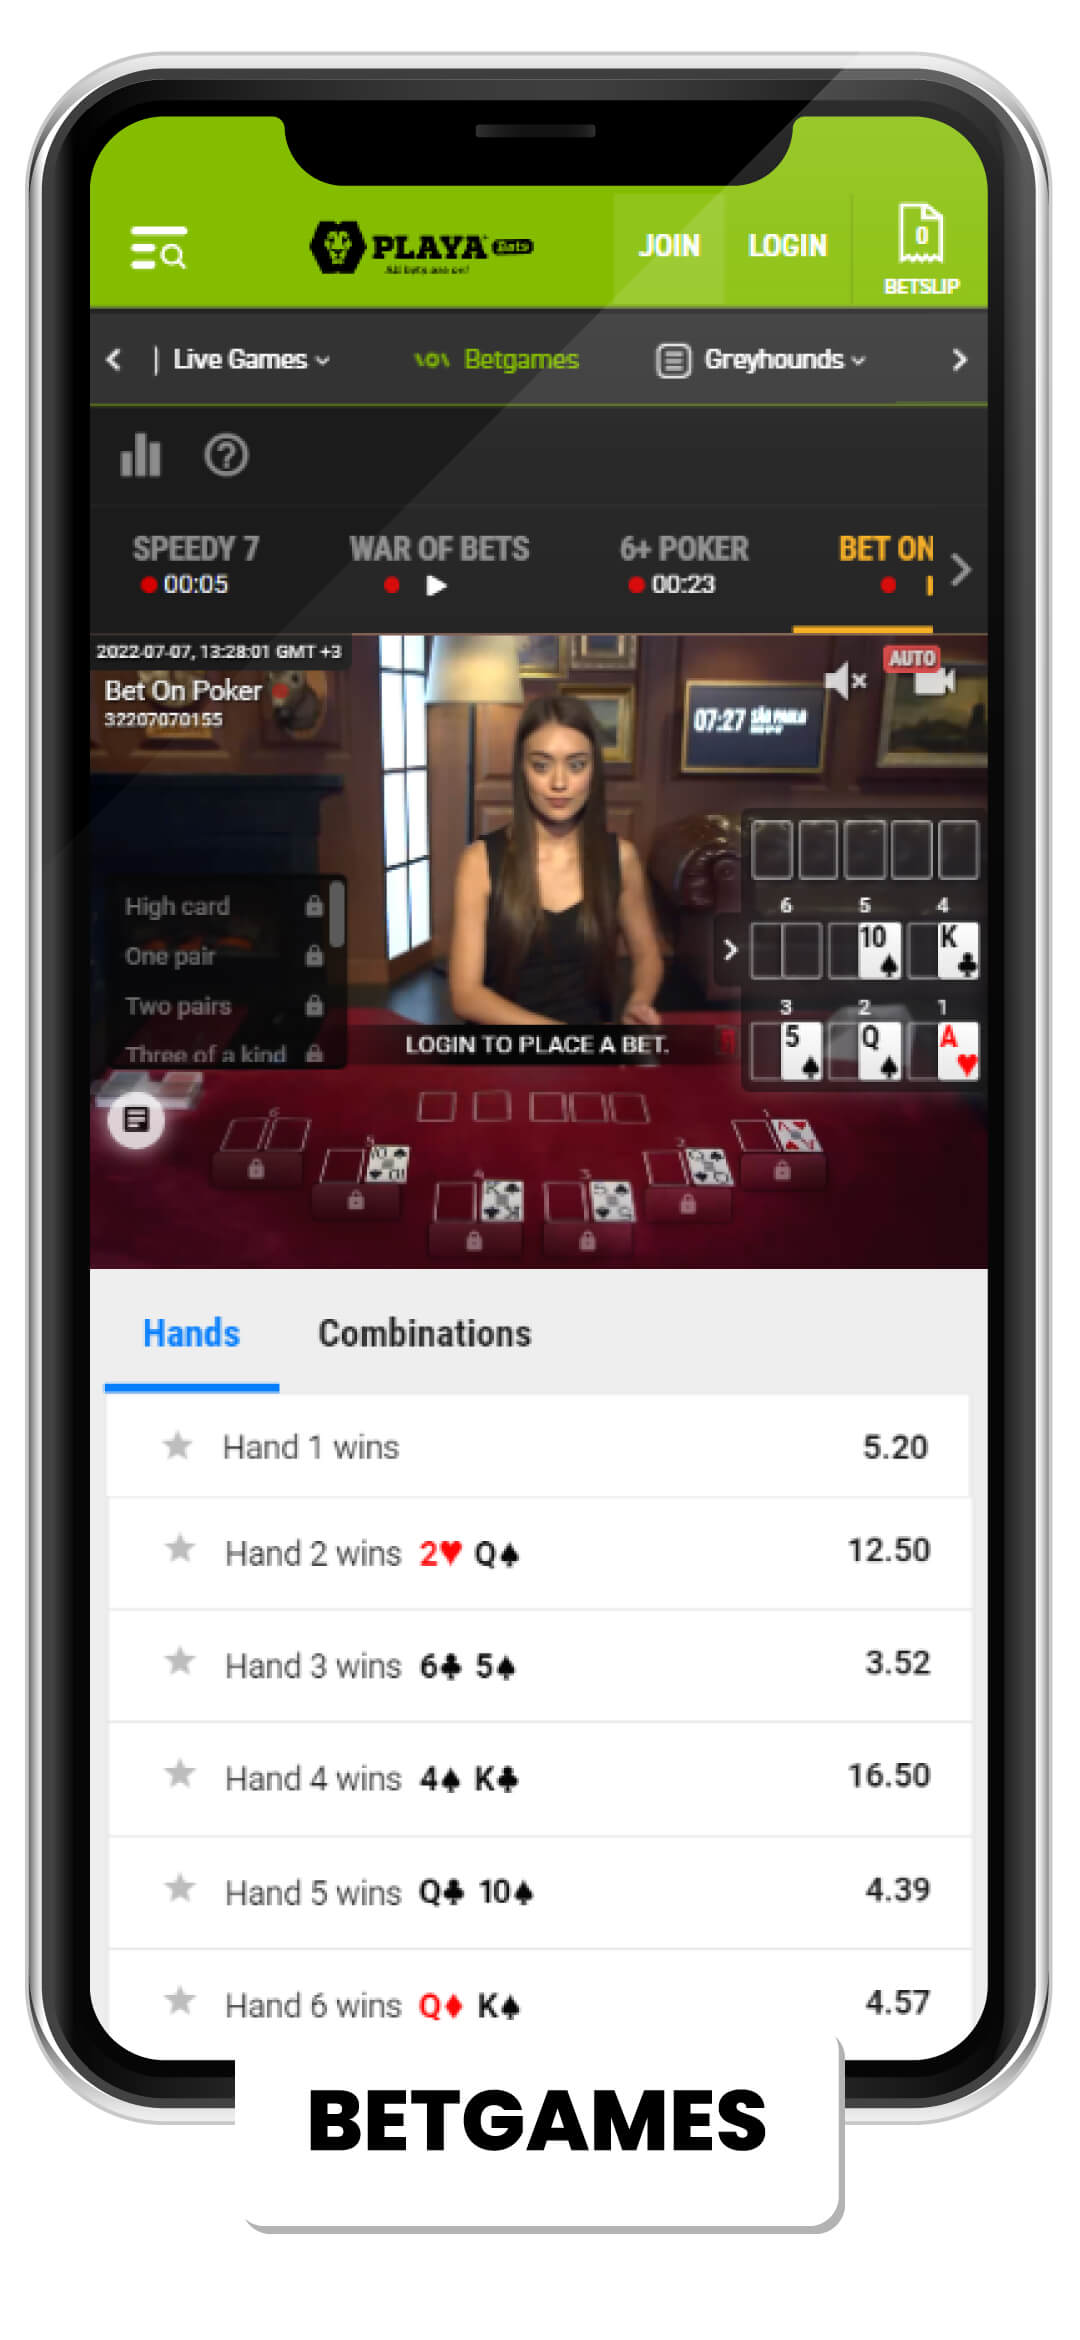 betgames in playabets